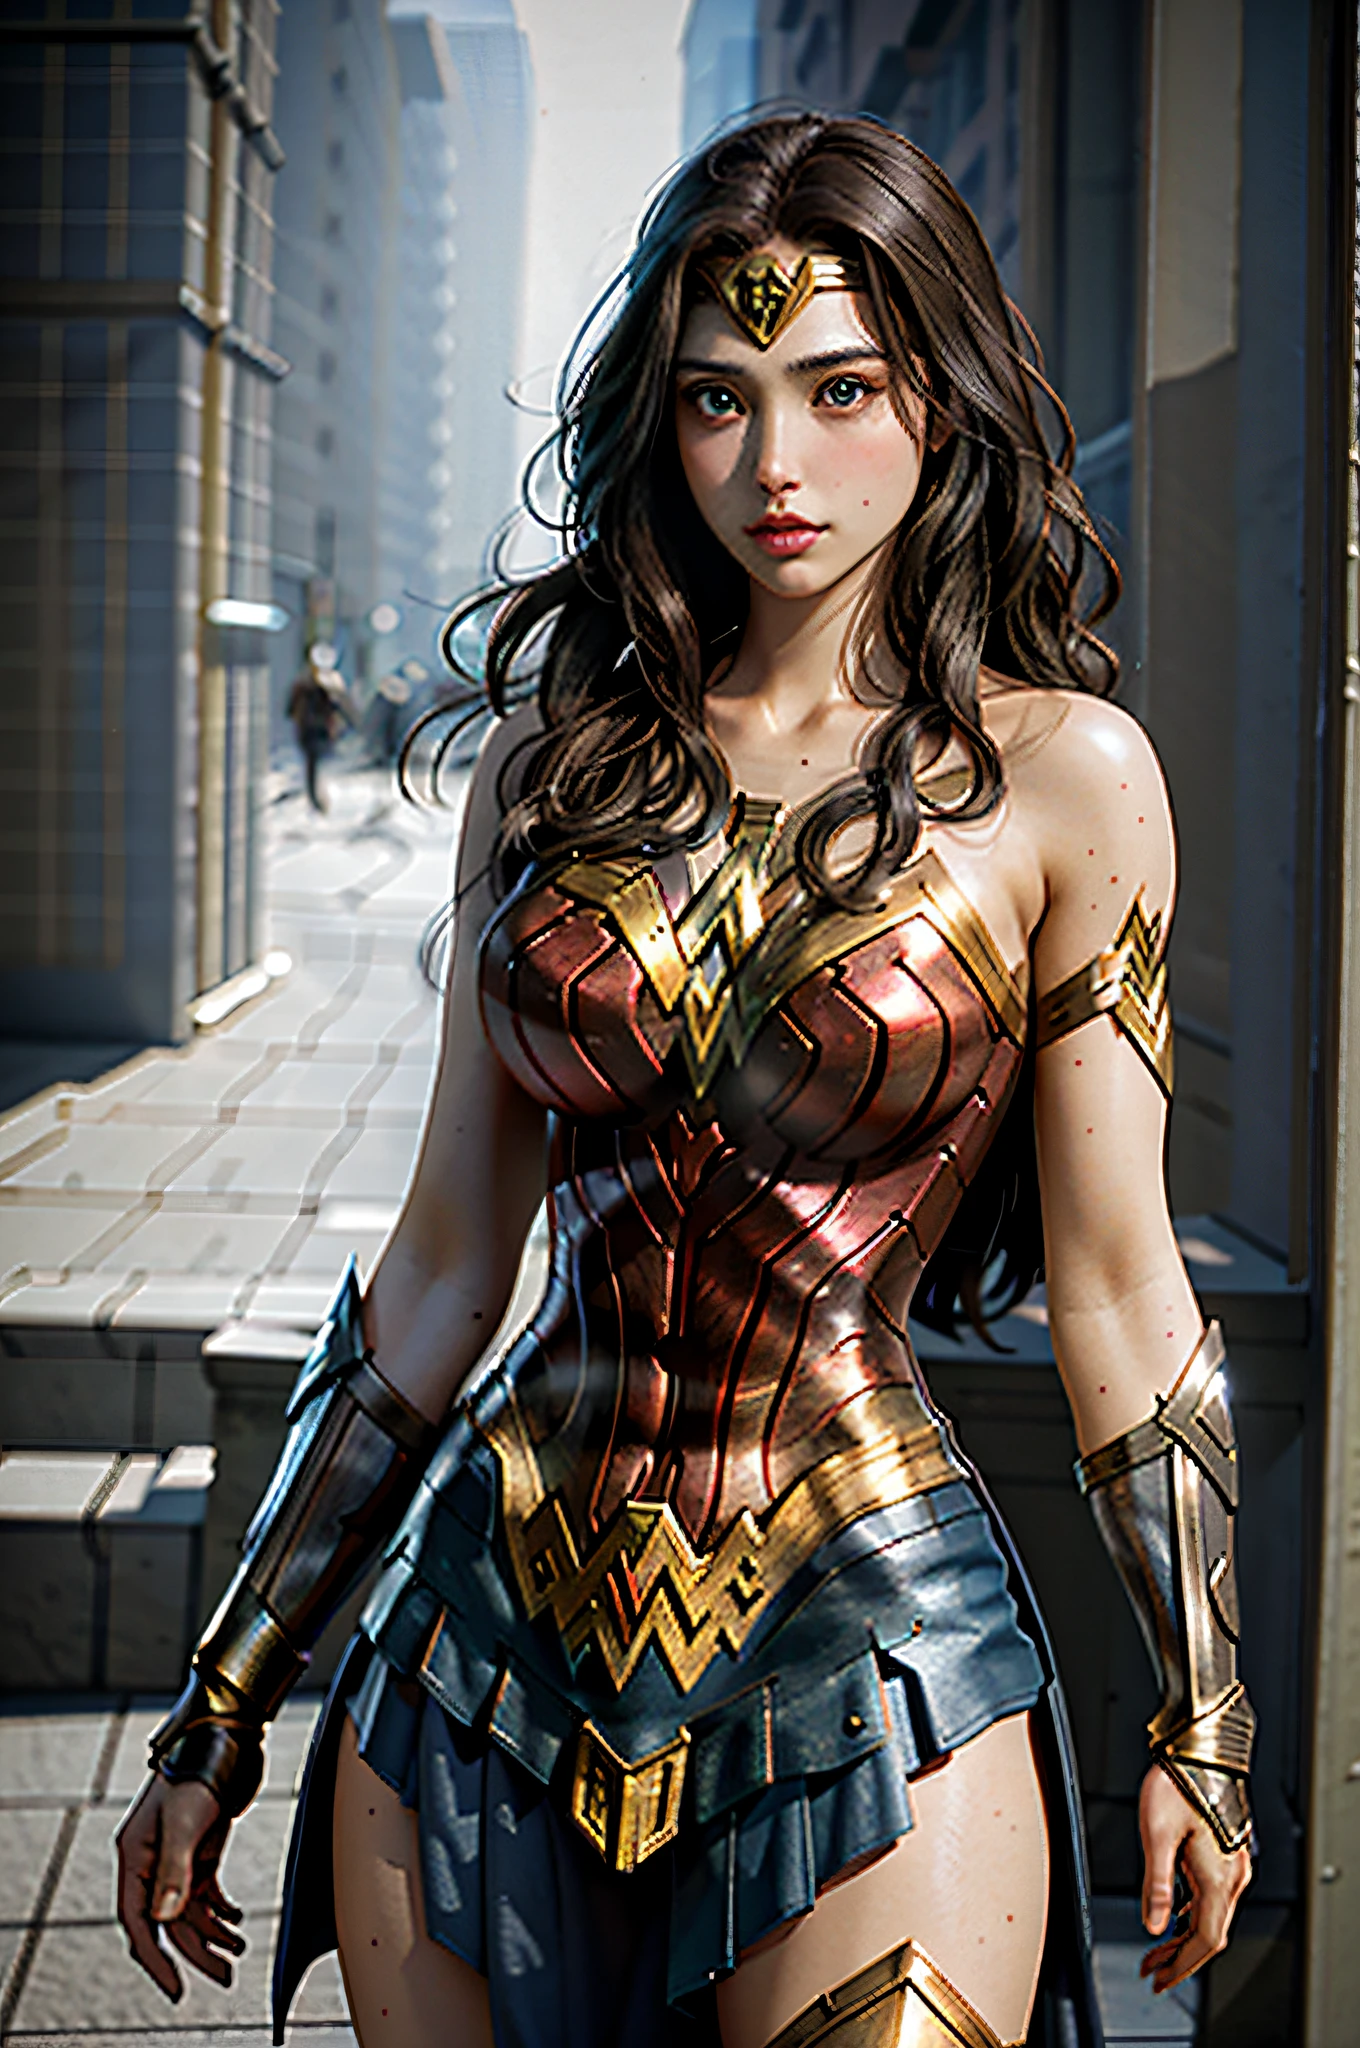 masterpiece, best quality, realistic, photograph, photorealism, hyper-detailed, perfect body, detailed eyes, beautiful girl, wonder woman, cosplay, sexy